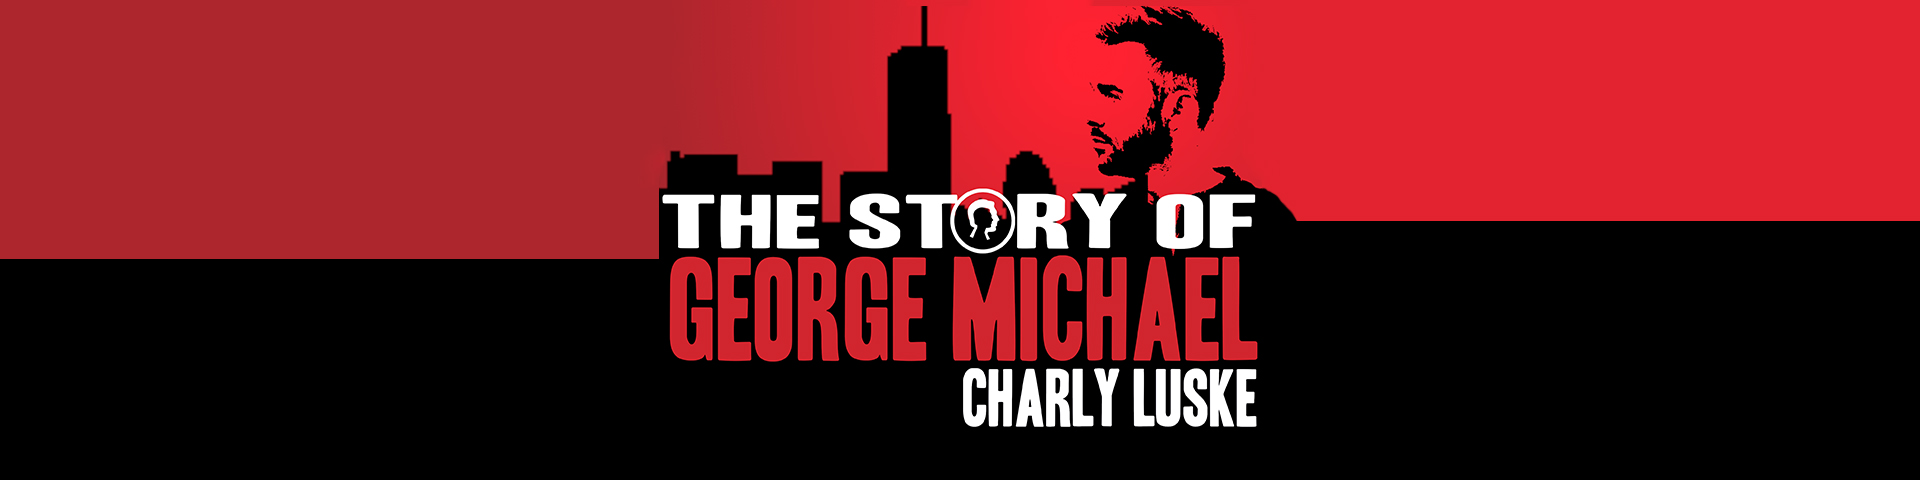 THE STORY OF GEORGE MICHAEL - CHARLY LUSKE